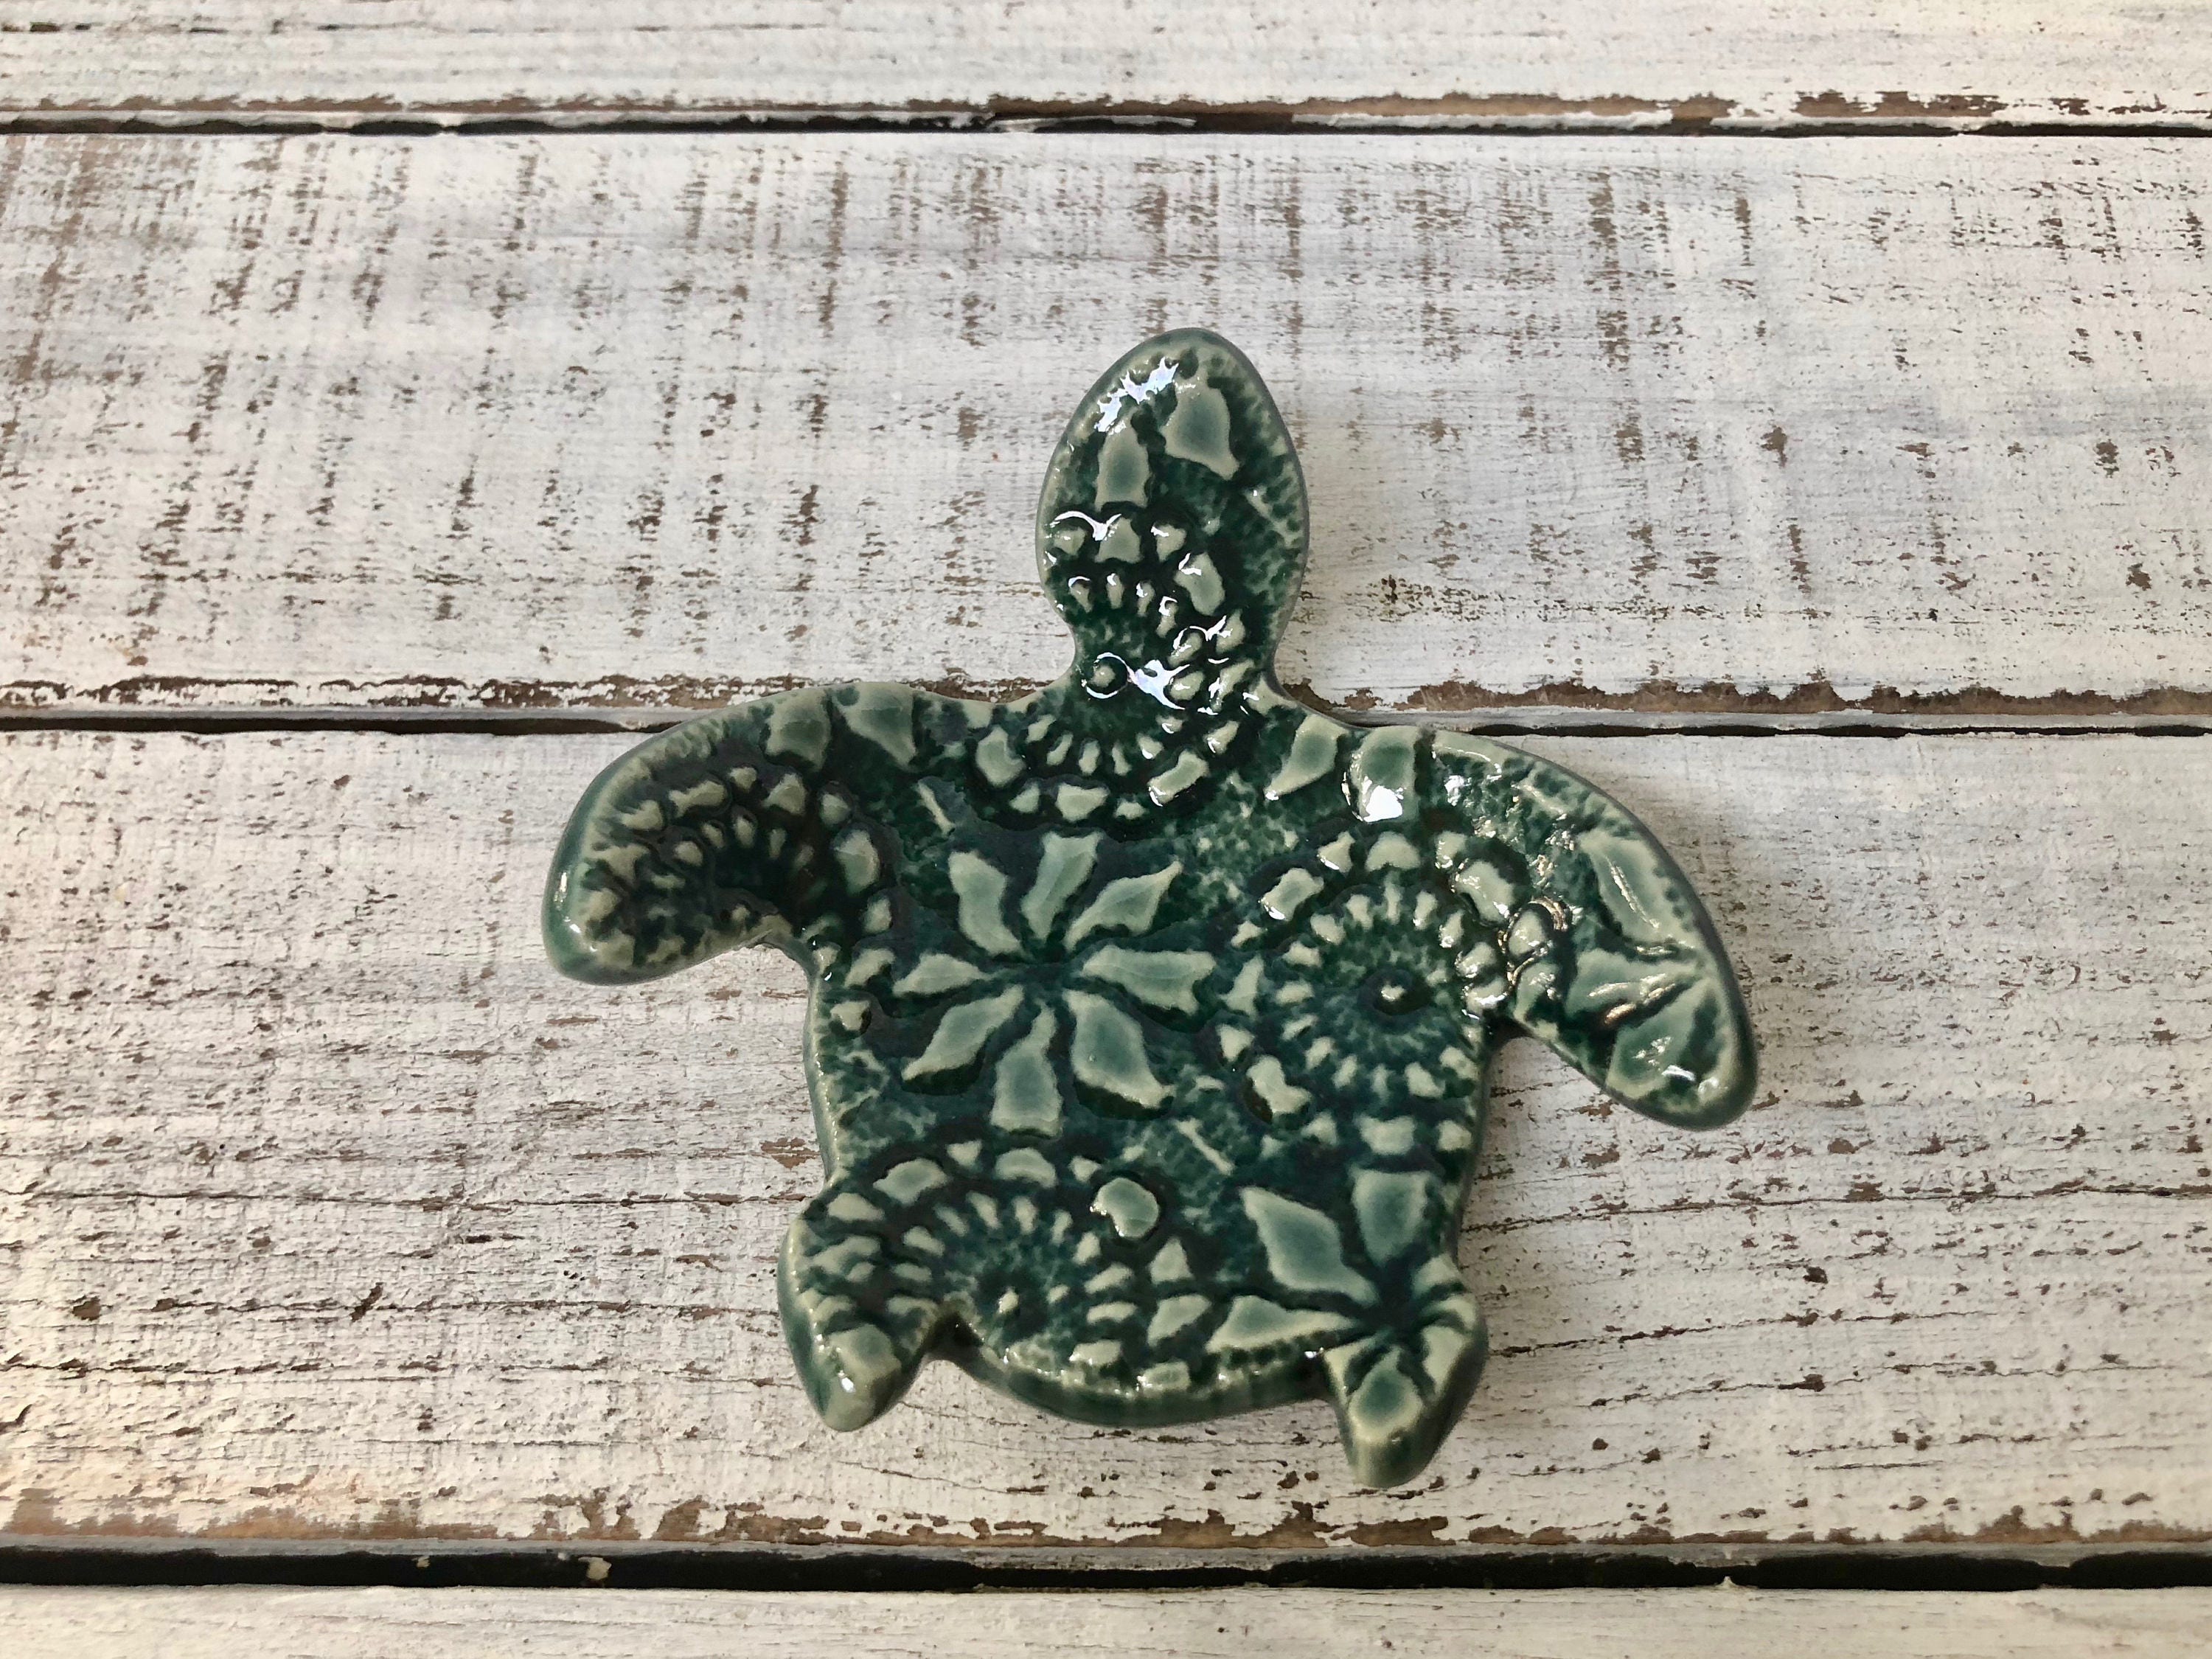 sea turtle spoon rest keeps your stove tidy. Each sea turtle spoon